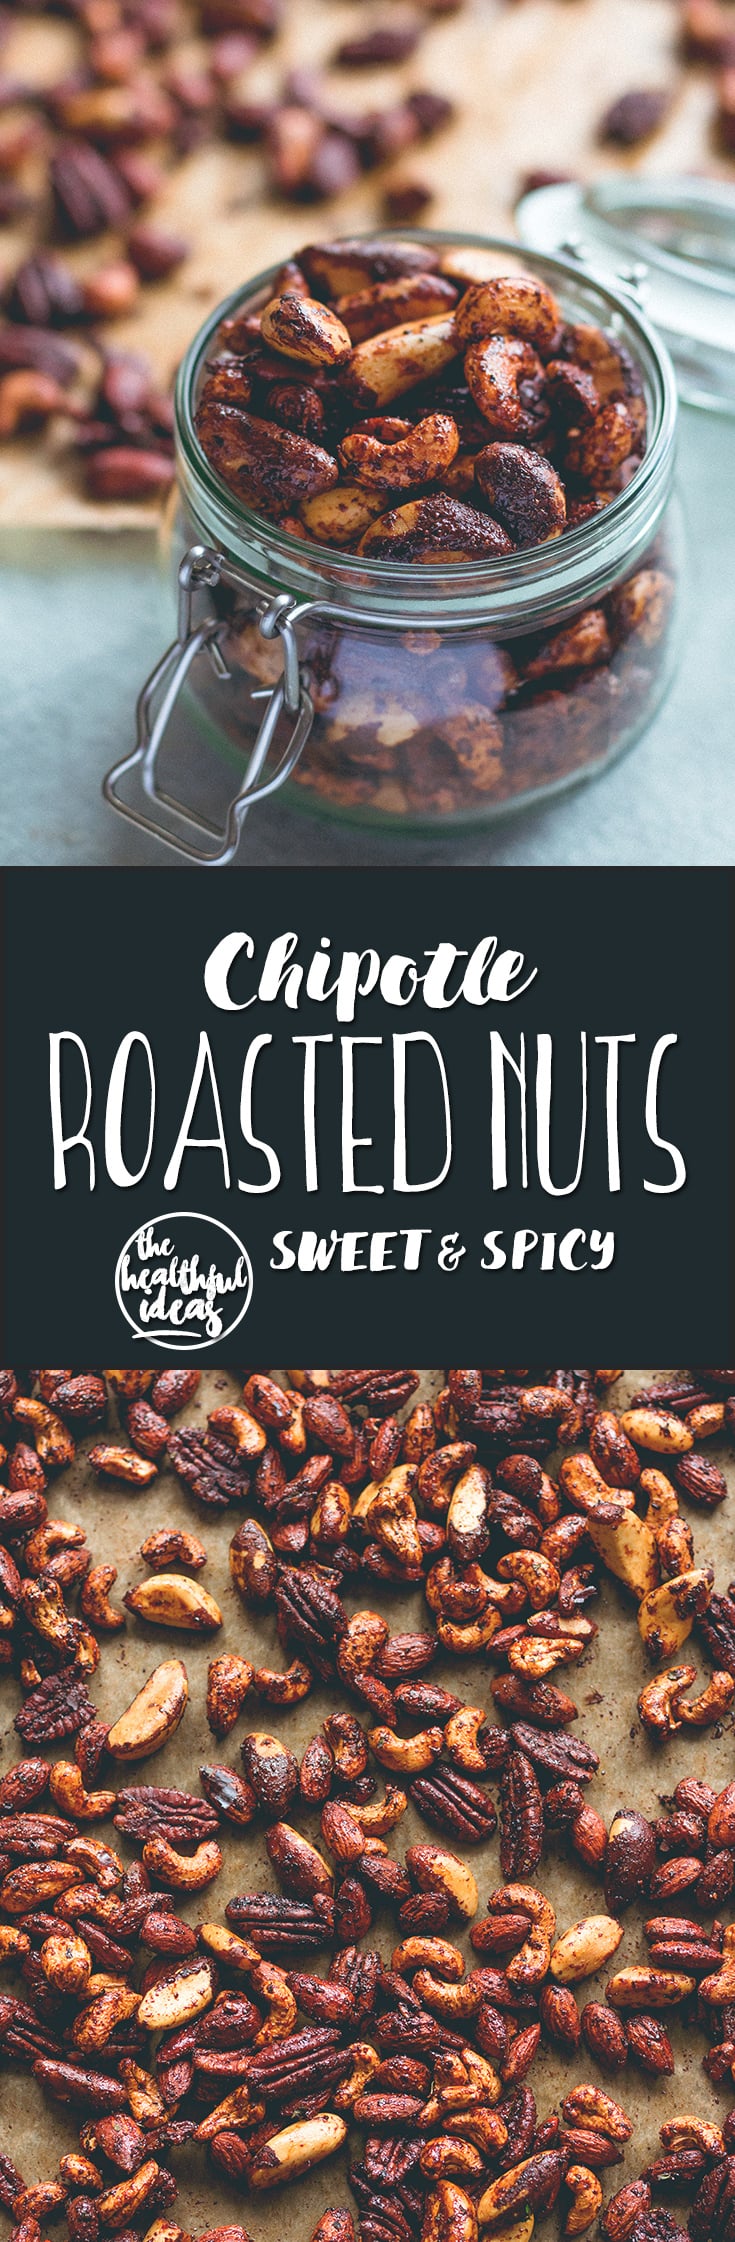 Chipotle Roasted Nuts - maple syrup, coconut oil, and spices. These are incredible! Vegan and gluten-free. | thehealthfulideas.com